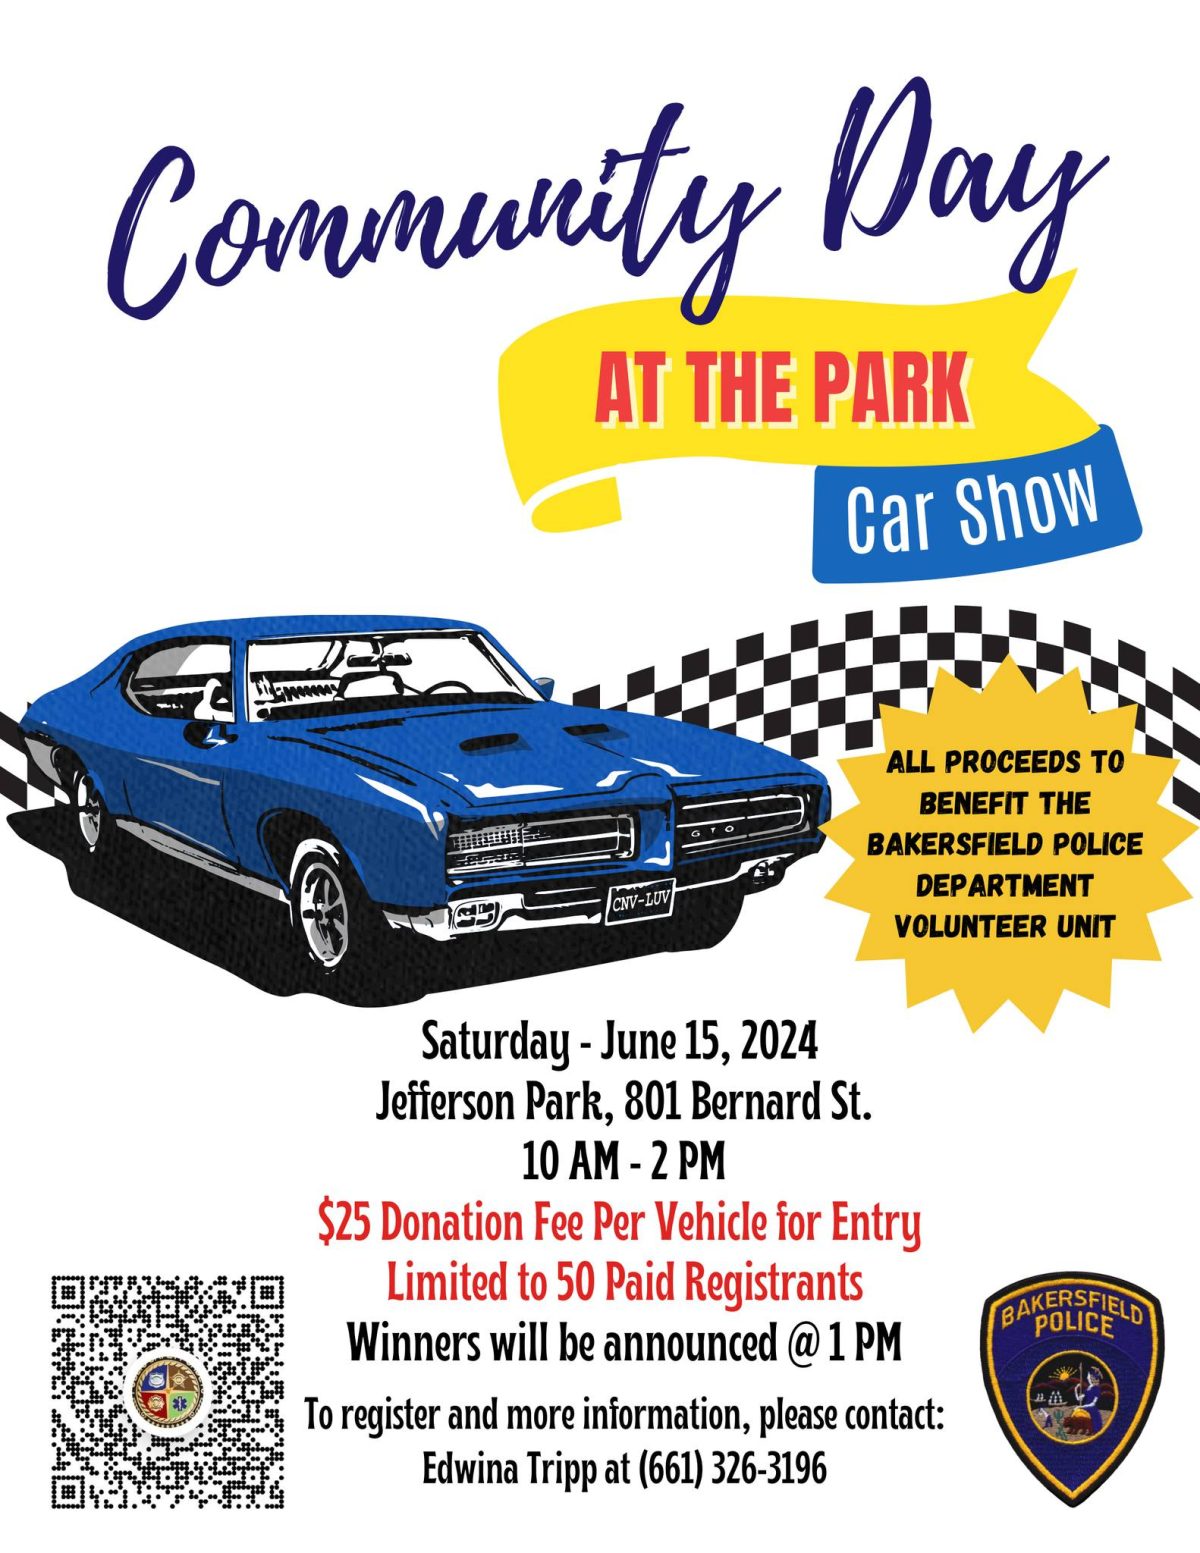 Community Day at the Park Car Show